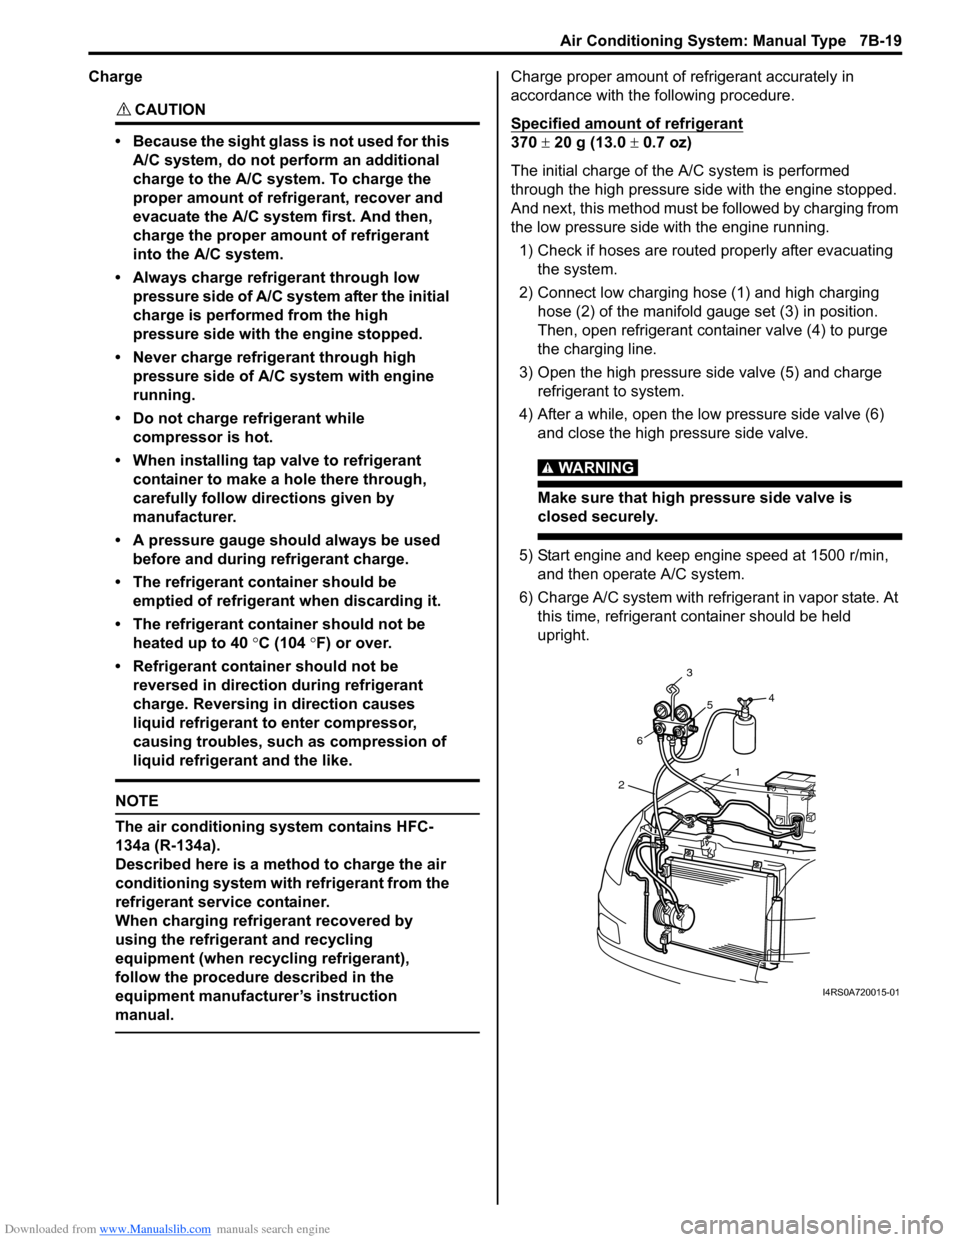 SUZUKI SWIFT 2006 2.G Service Owners Manual Downloaded from www.Manualslib.com manuals search engine Air Conditioning System: Manual Type 7B-19
Charge
CAUTION! 
• Because the sight glass is not used for this A/C system, do not perform an addi